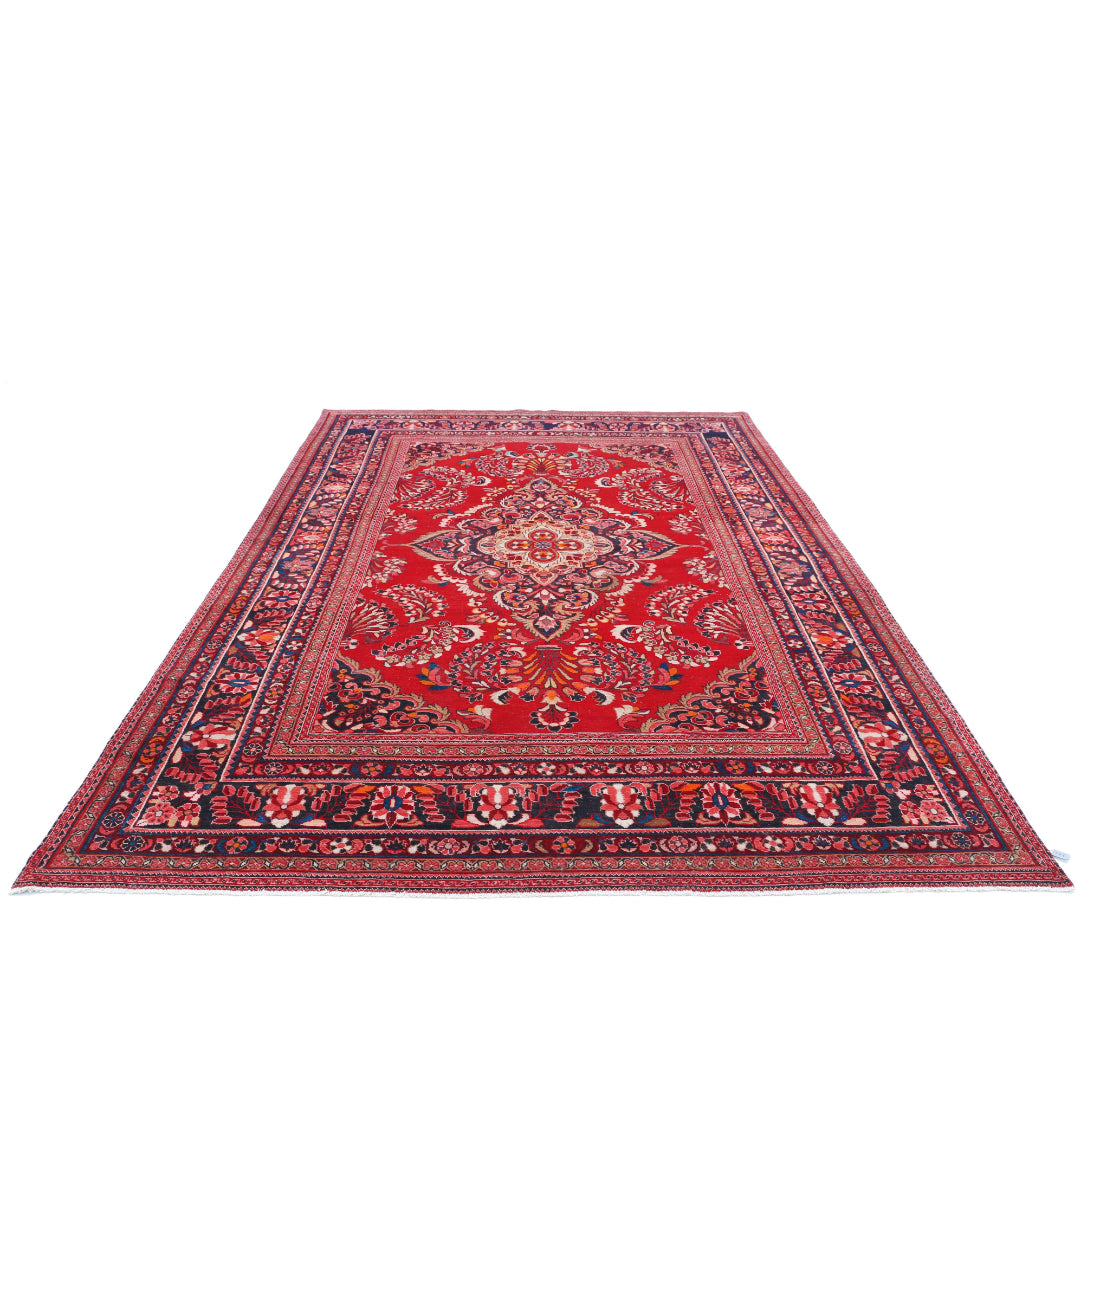 Hand Knotted Persian Mashad Wool Rug - 7'8'' x 11'11'' 7'8'' x 11'11'' (230 X 358) / Red / Blue